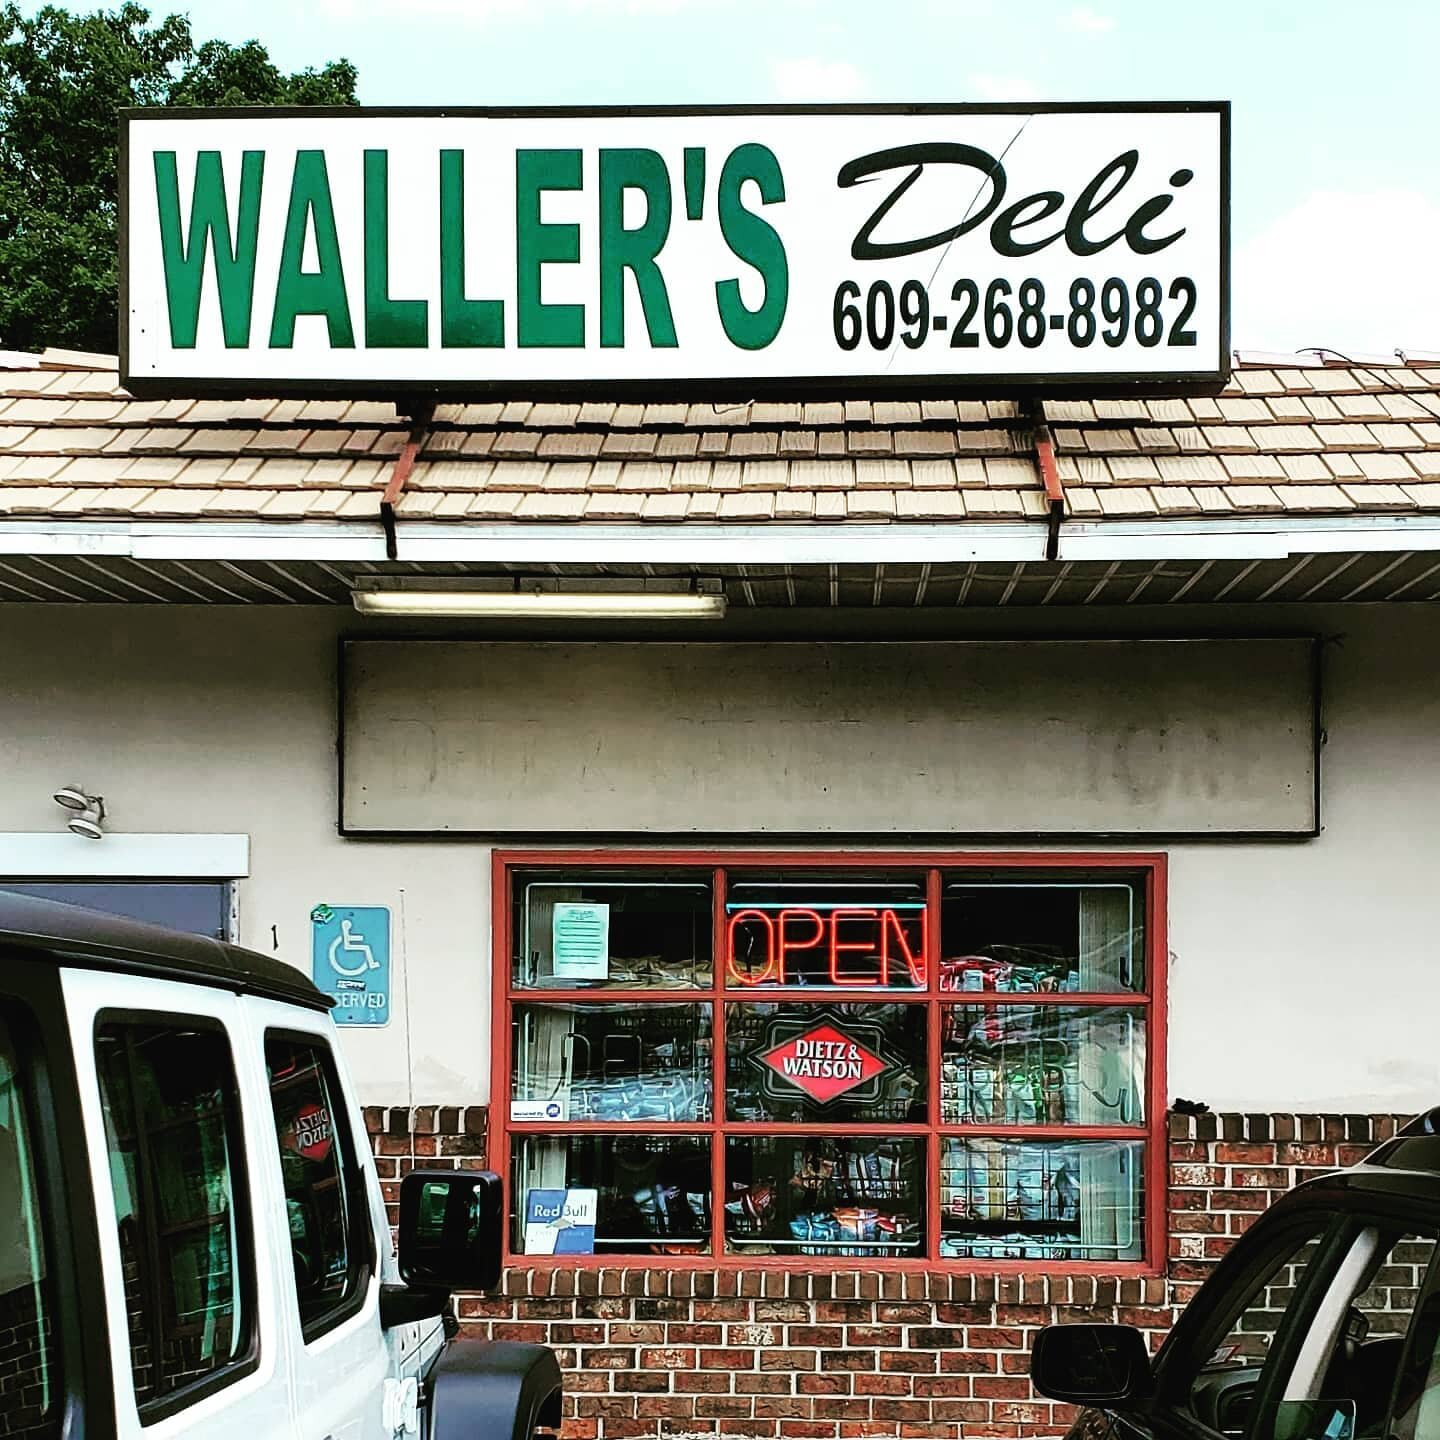 Stop by Waller's Deli for great sandwiches, salads and snacks..JBJ of course..

#tabernacle #shamong #medford #southhampton #sj #deli #hoagies #subs #salads #jerseyboysjerky #snacks